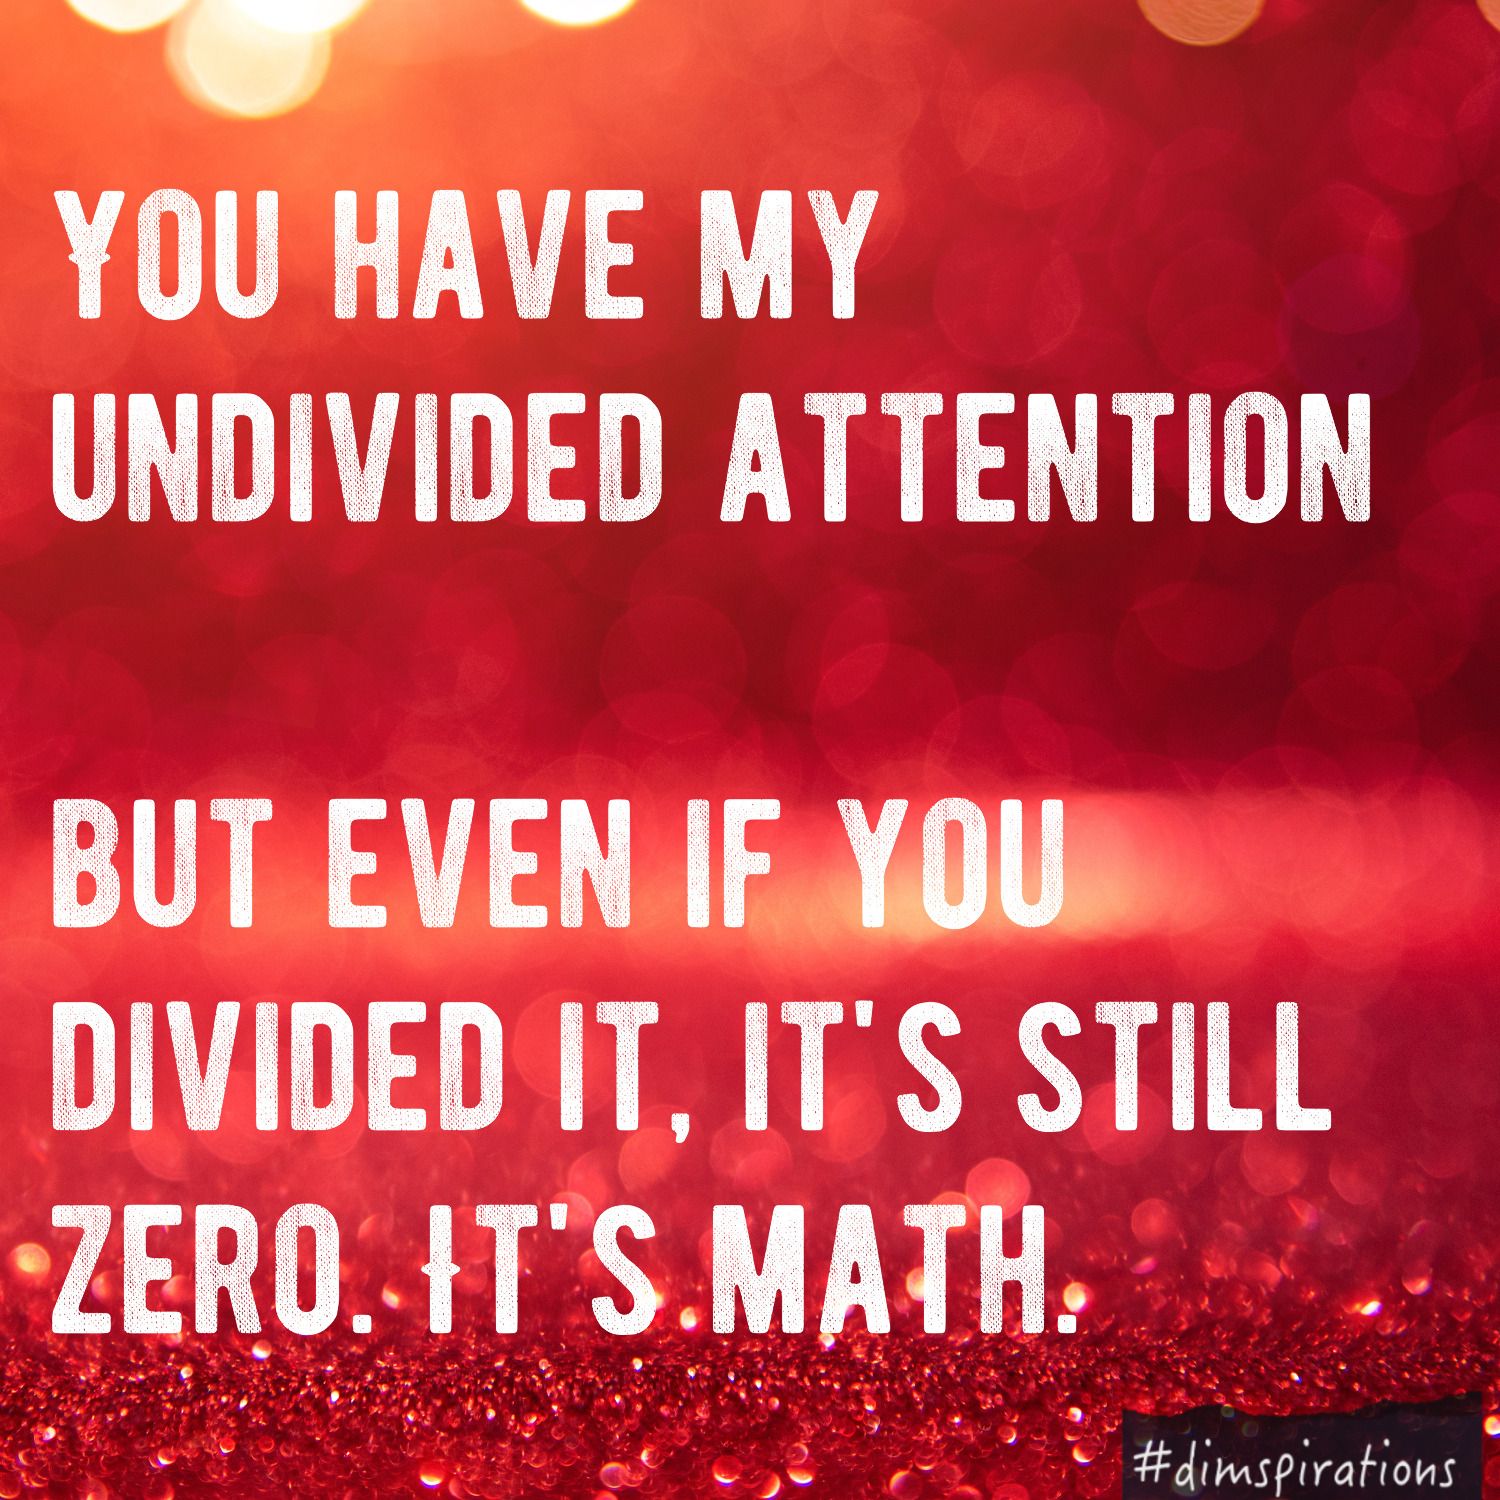 You have my undivided attention. But even if you divided it, it's still zero. It's math.